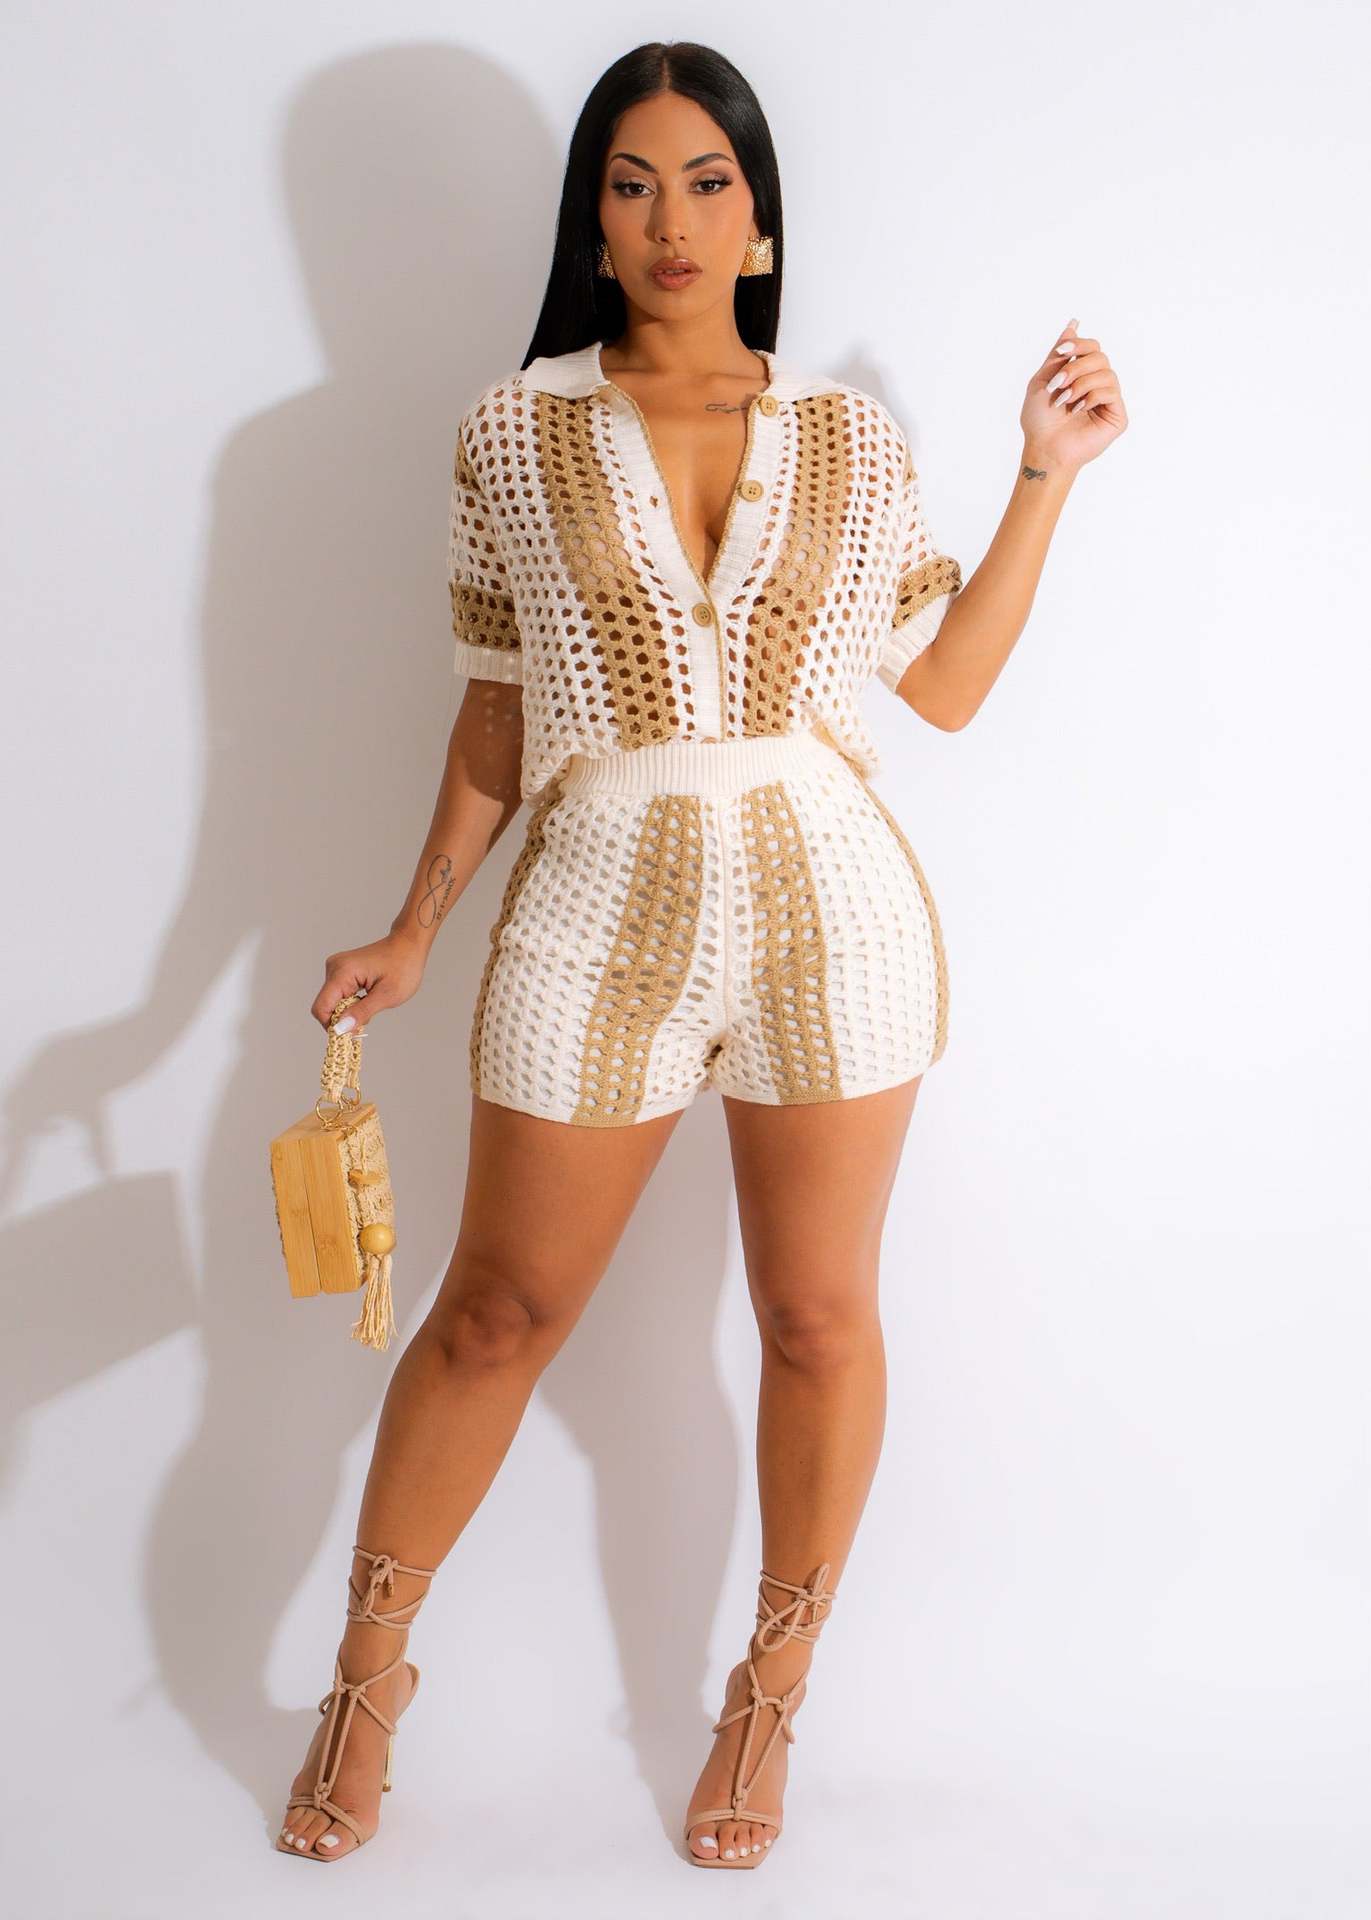 Hollow Out Cutout See Through Collared Knitted Shorts set.